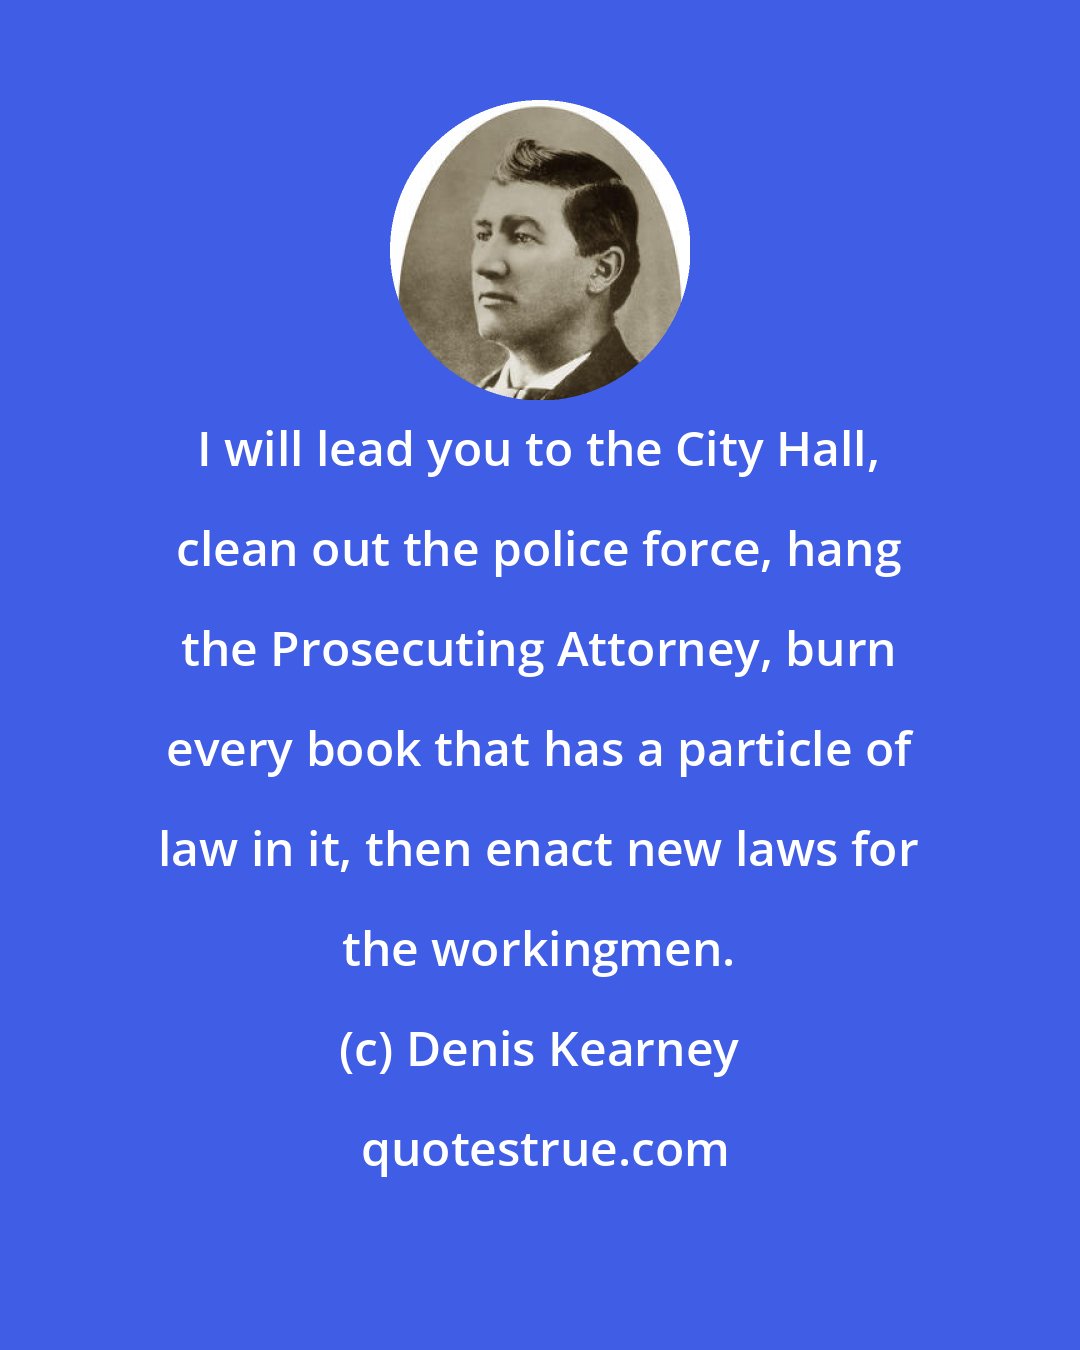 Denis Kearney: I will lead you to the City Hall, clean out the police force, hang the Prosecuting Attorney, burn every book that has a particle of law in it, then enact new laws for the workingmen.